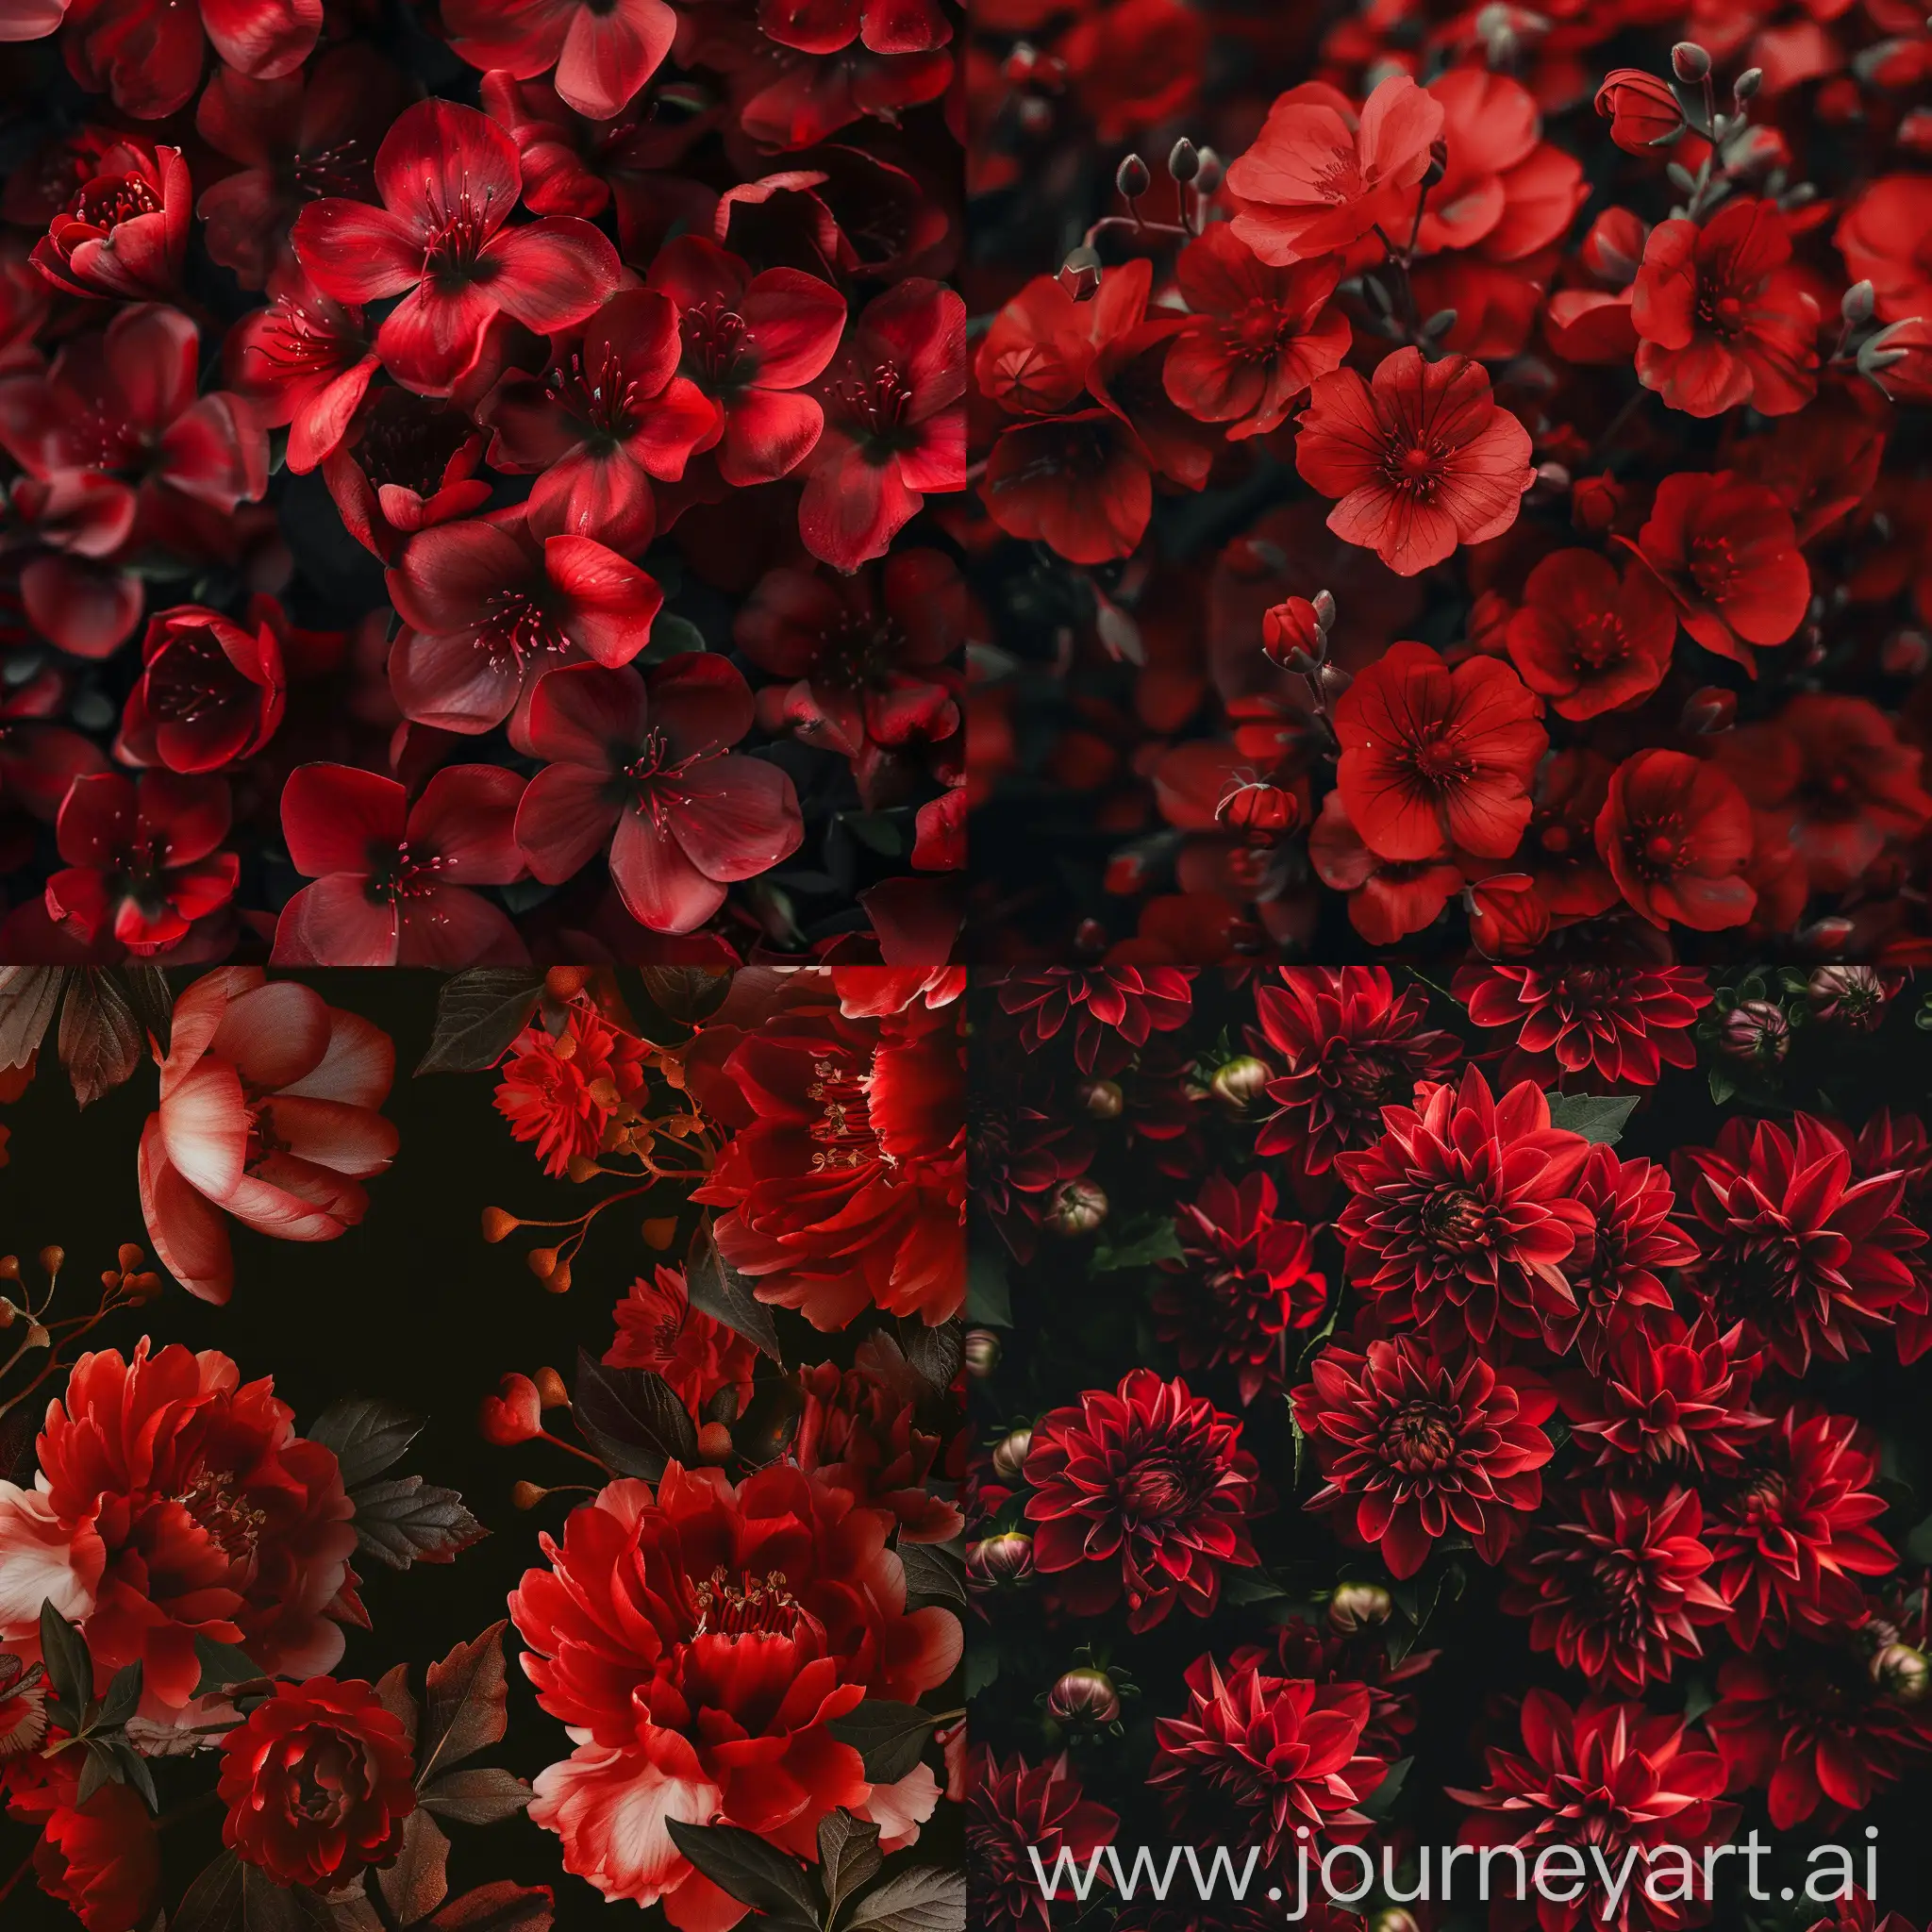 Luxurious-Red-Floral-Arrangement-for-Instagram-Story-Background